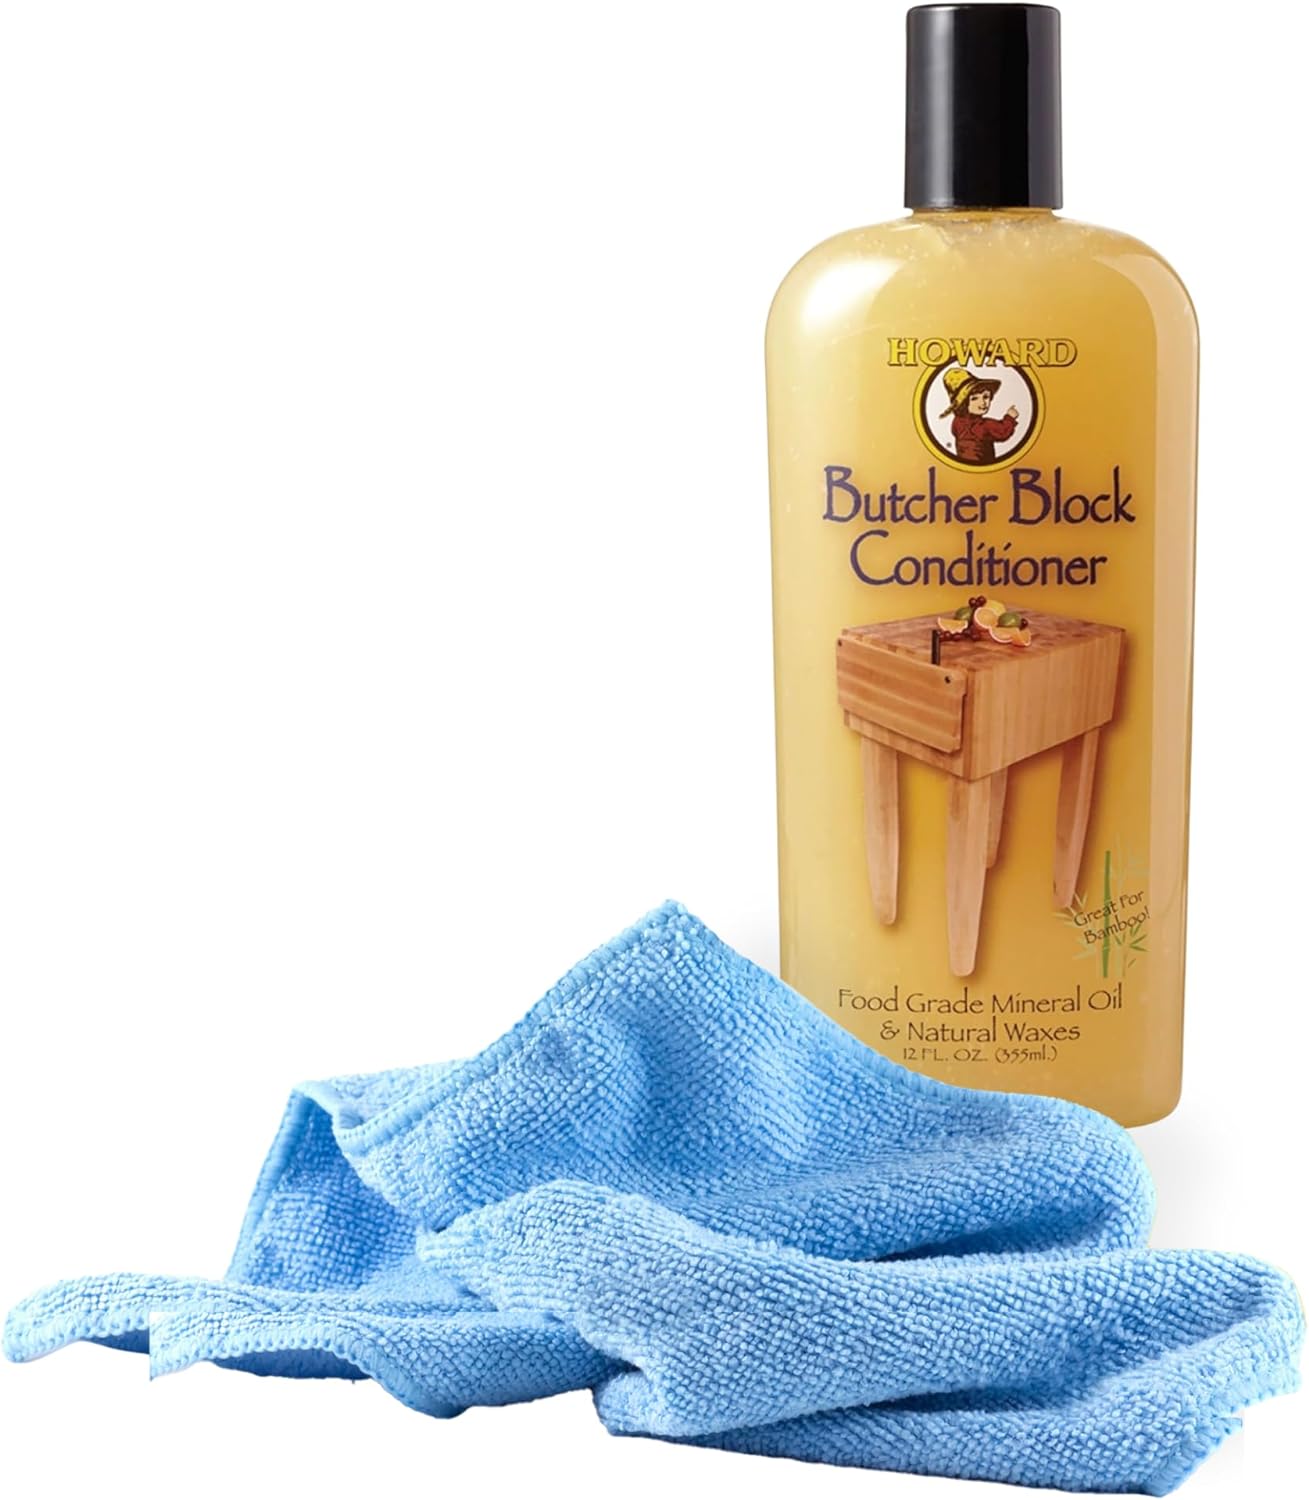 Black Swan Distributors - Howard Butcher Block Conditioner (12 oz) & Non-Abrasive Microfiber Cleaning Cloth (15x15 in) - Beeswax, Carnauba Wax & Mineral Oil - For All Food-Safe Wooden Surfaces